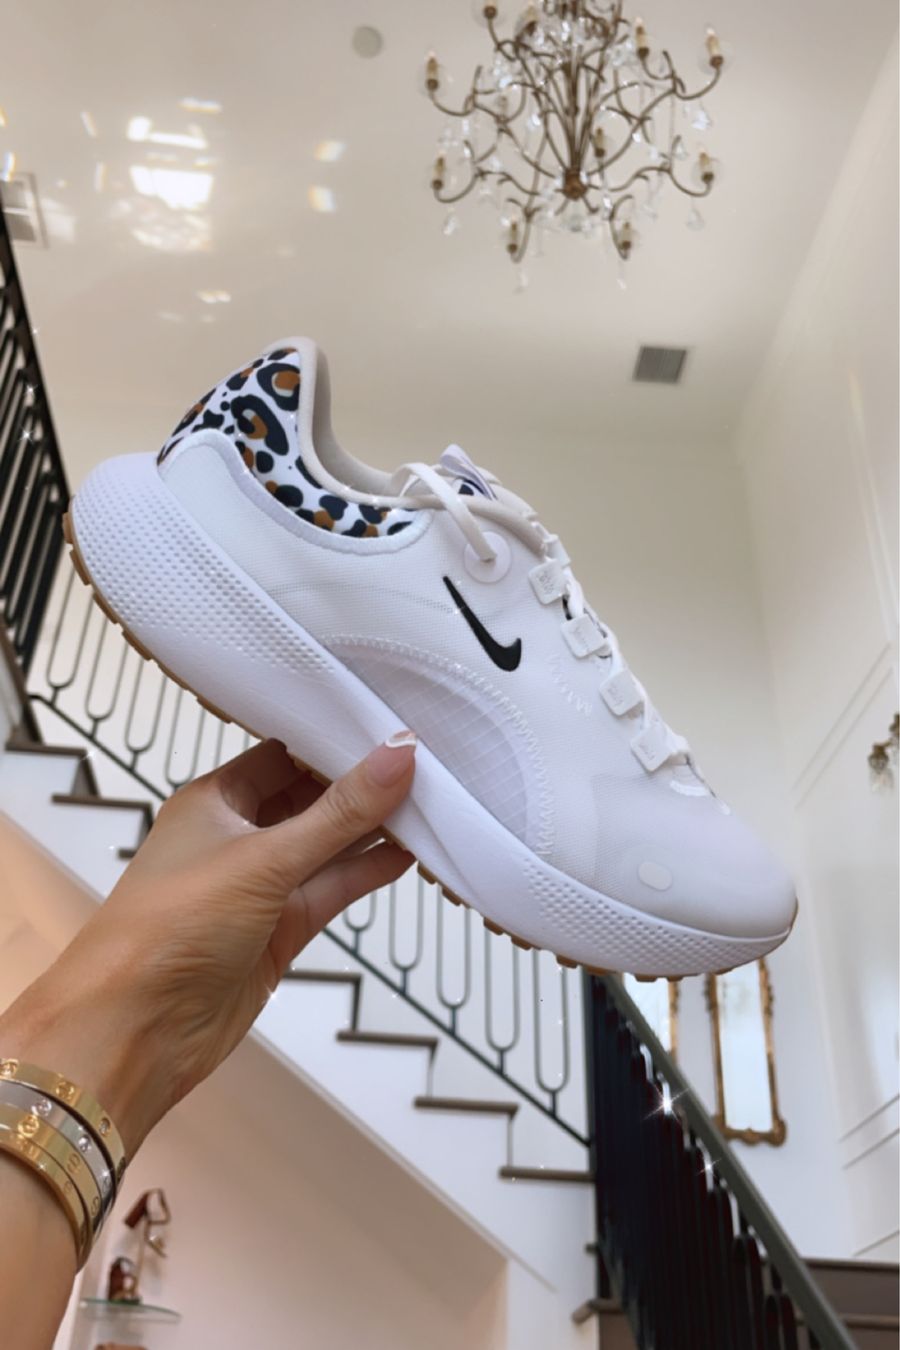 Nike Sneakers, Leopard Print Sneakers, White Sneakers, White Tennis Shoes, Nordstrom Sale Women's Shoes, Emily Ann Gemma | Instagram Recap by popular US life and style blog, The Sweetest Thing: image of Emily Gemma holding a white leopard print Nike sneaker. 